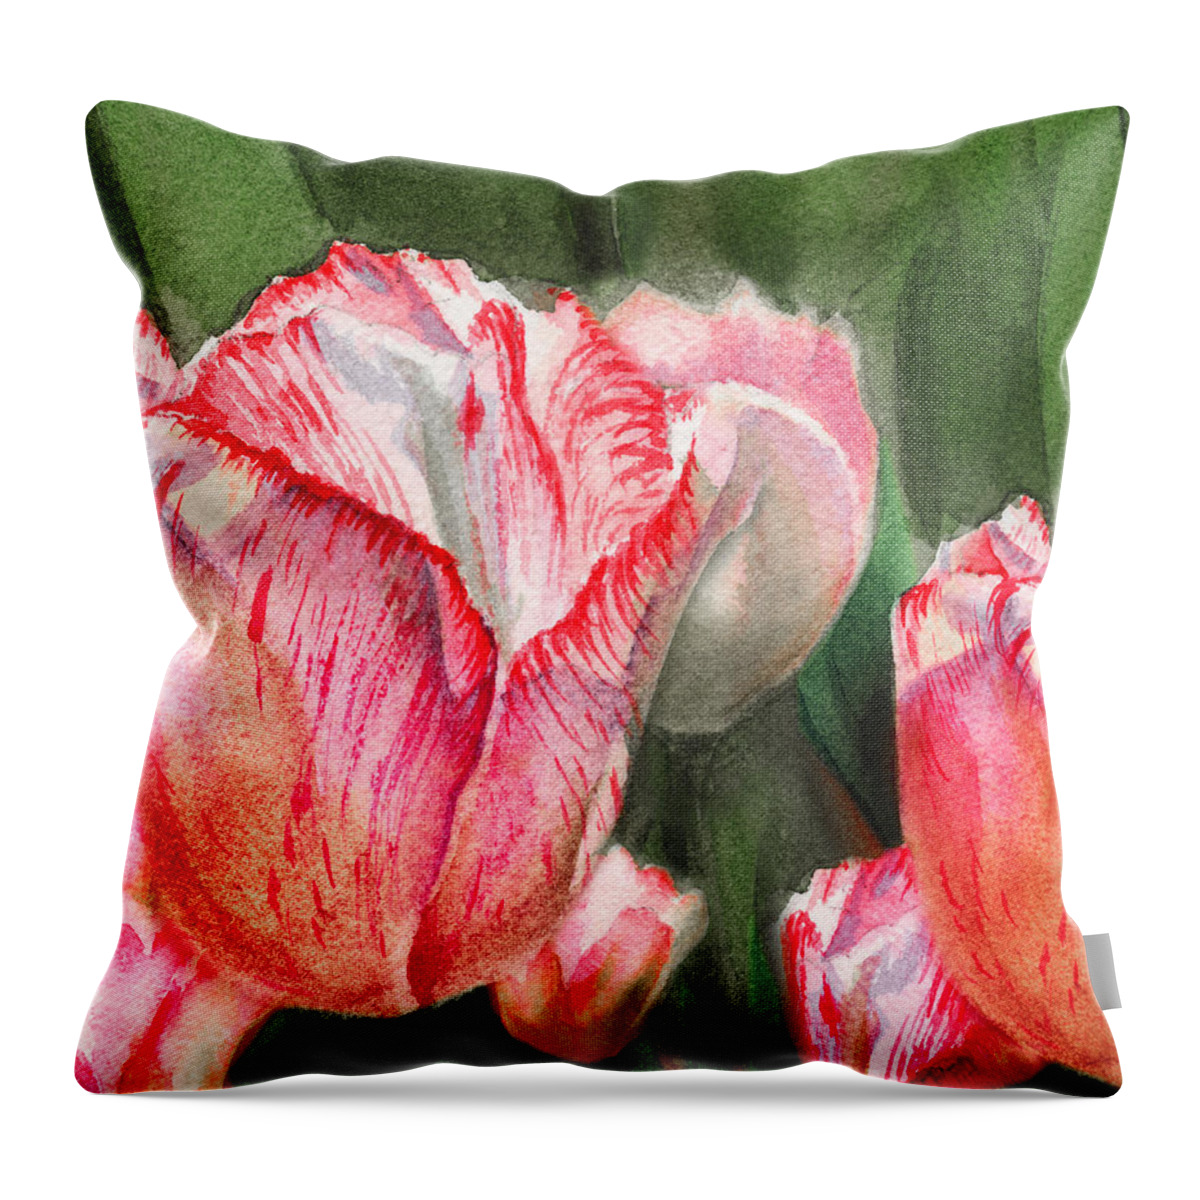 Tulip Throw Pillow featuring the painting Pink Tulips by Irina Sztukowski by Irina Sztukowski